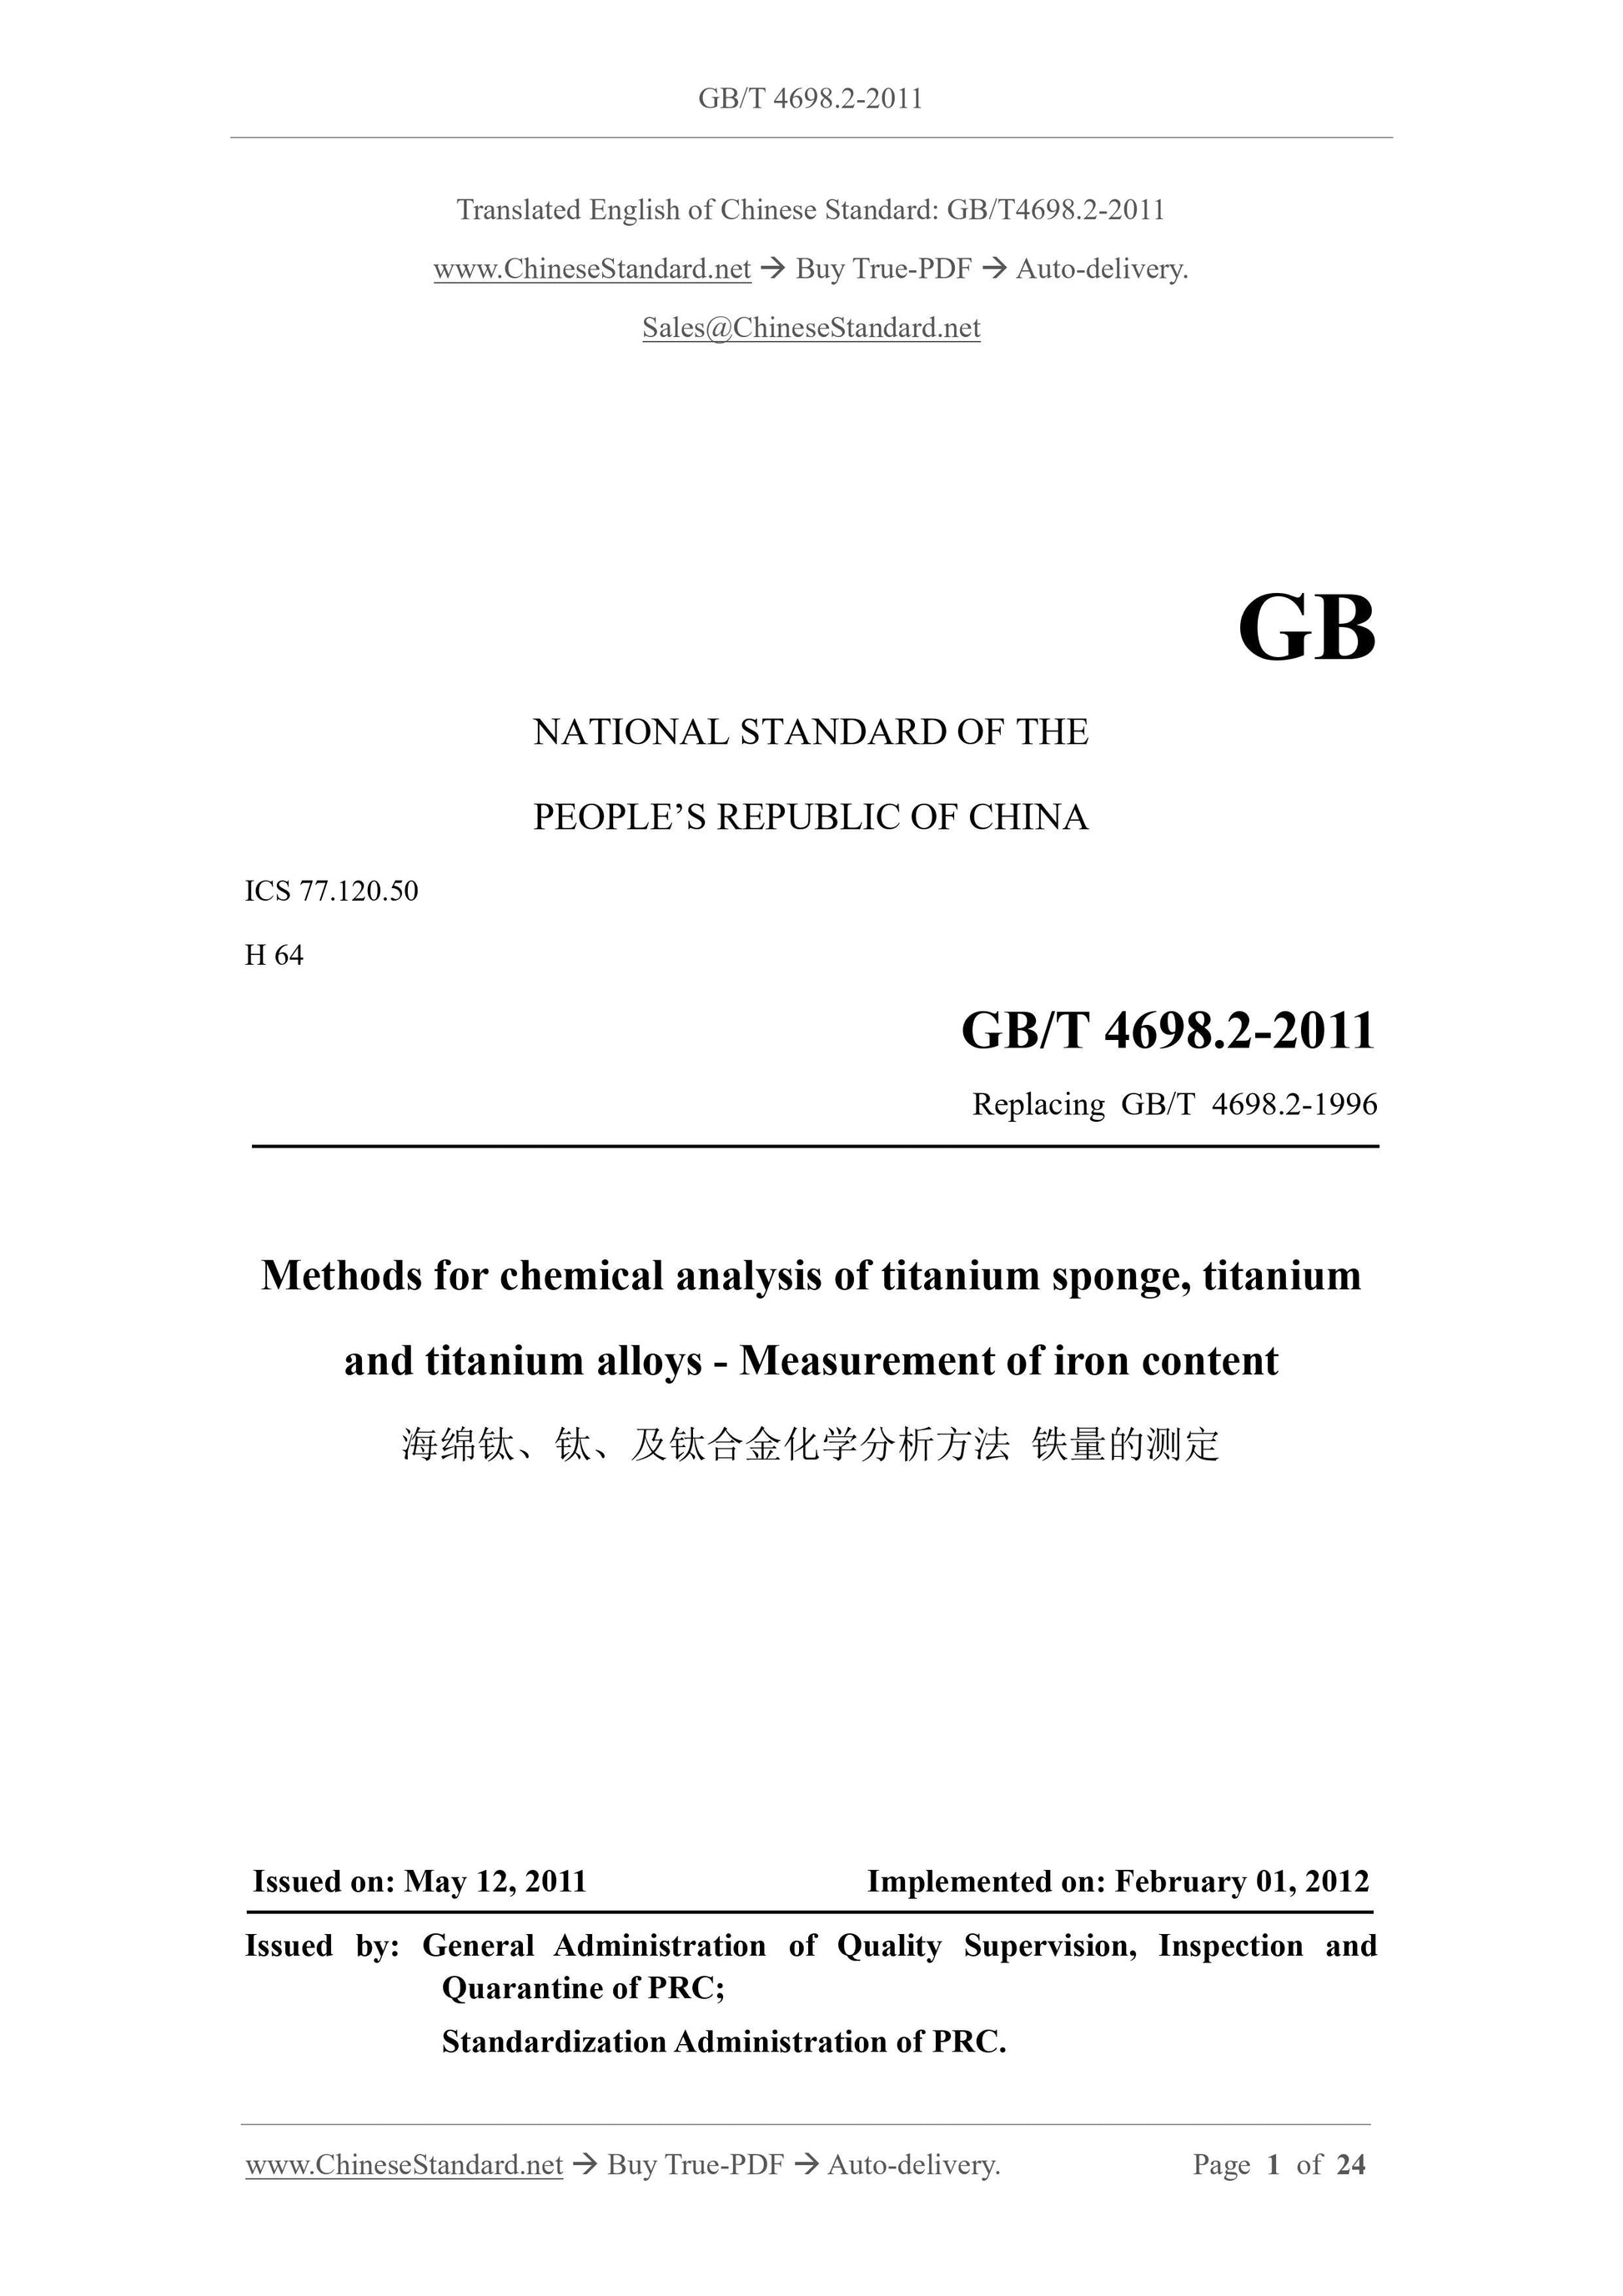 GB/T 4698.2-2011 Page 1